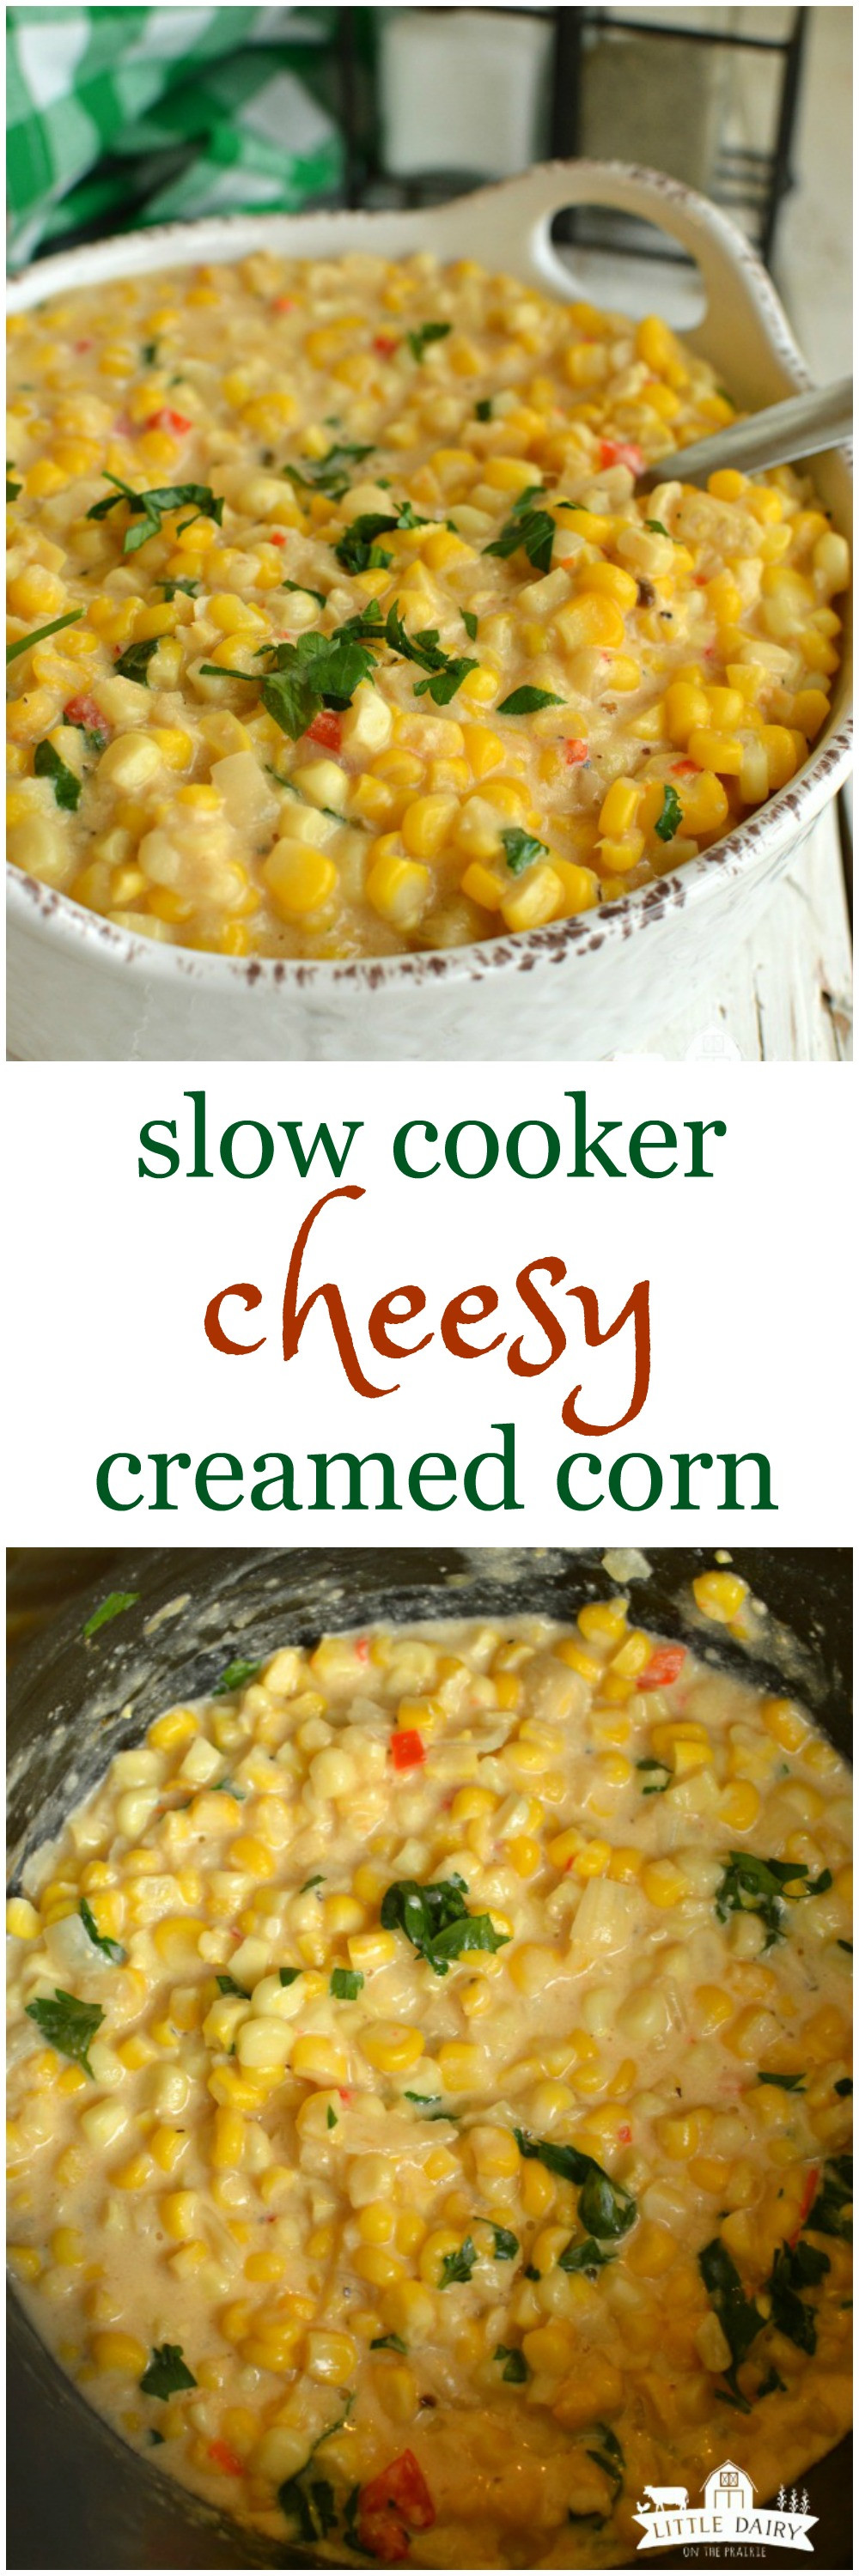 Slow Cooker Corn
 Slow Cooker Cheesy Creamed Corn Little Dairy the Prairie